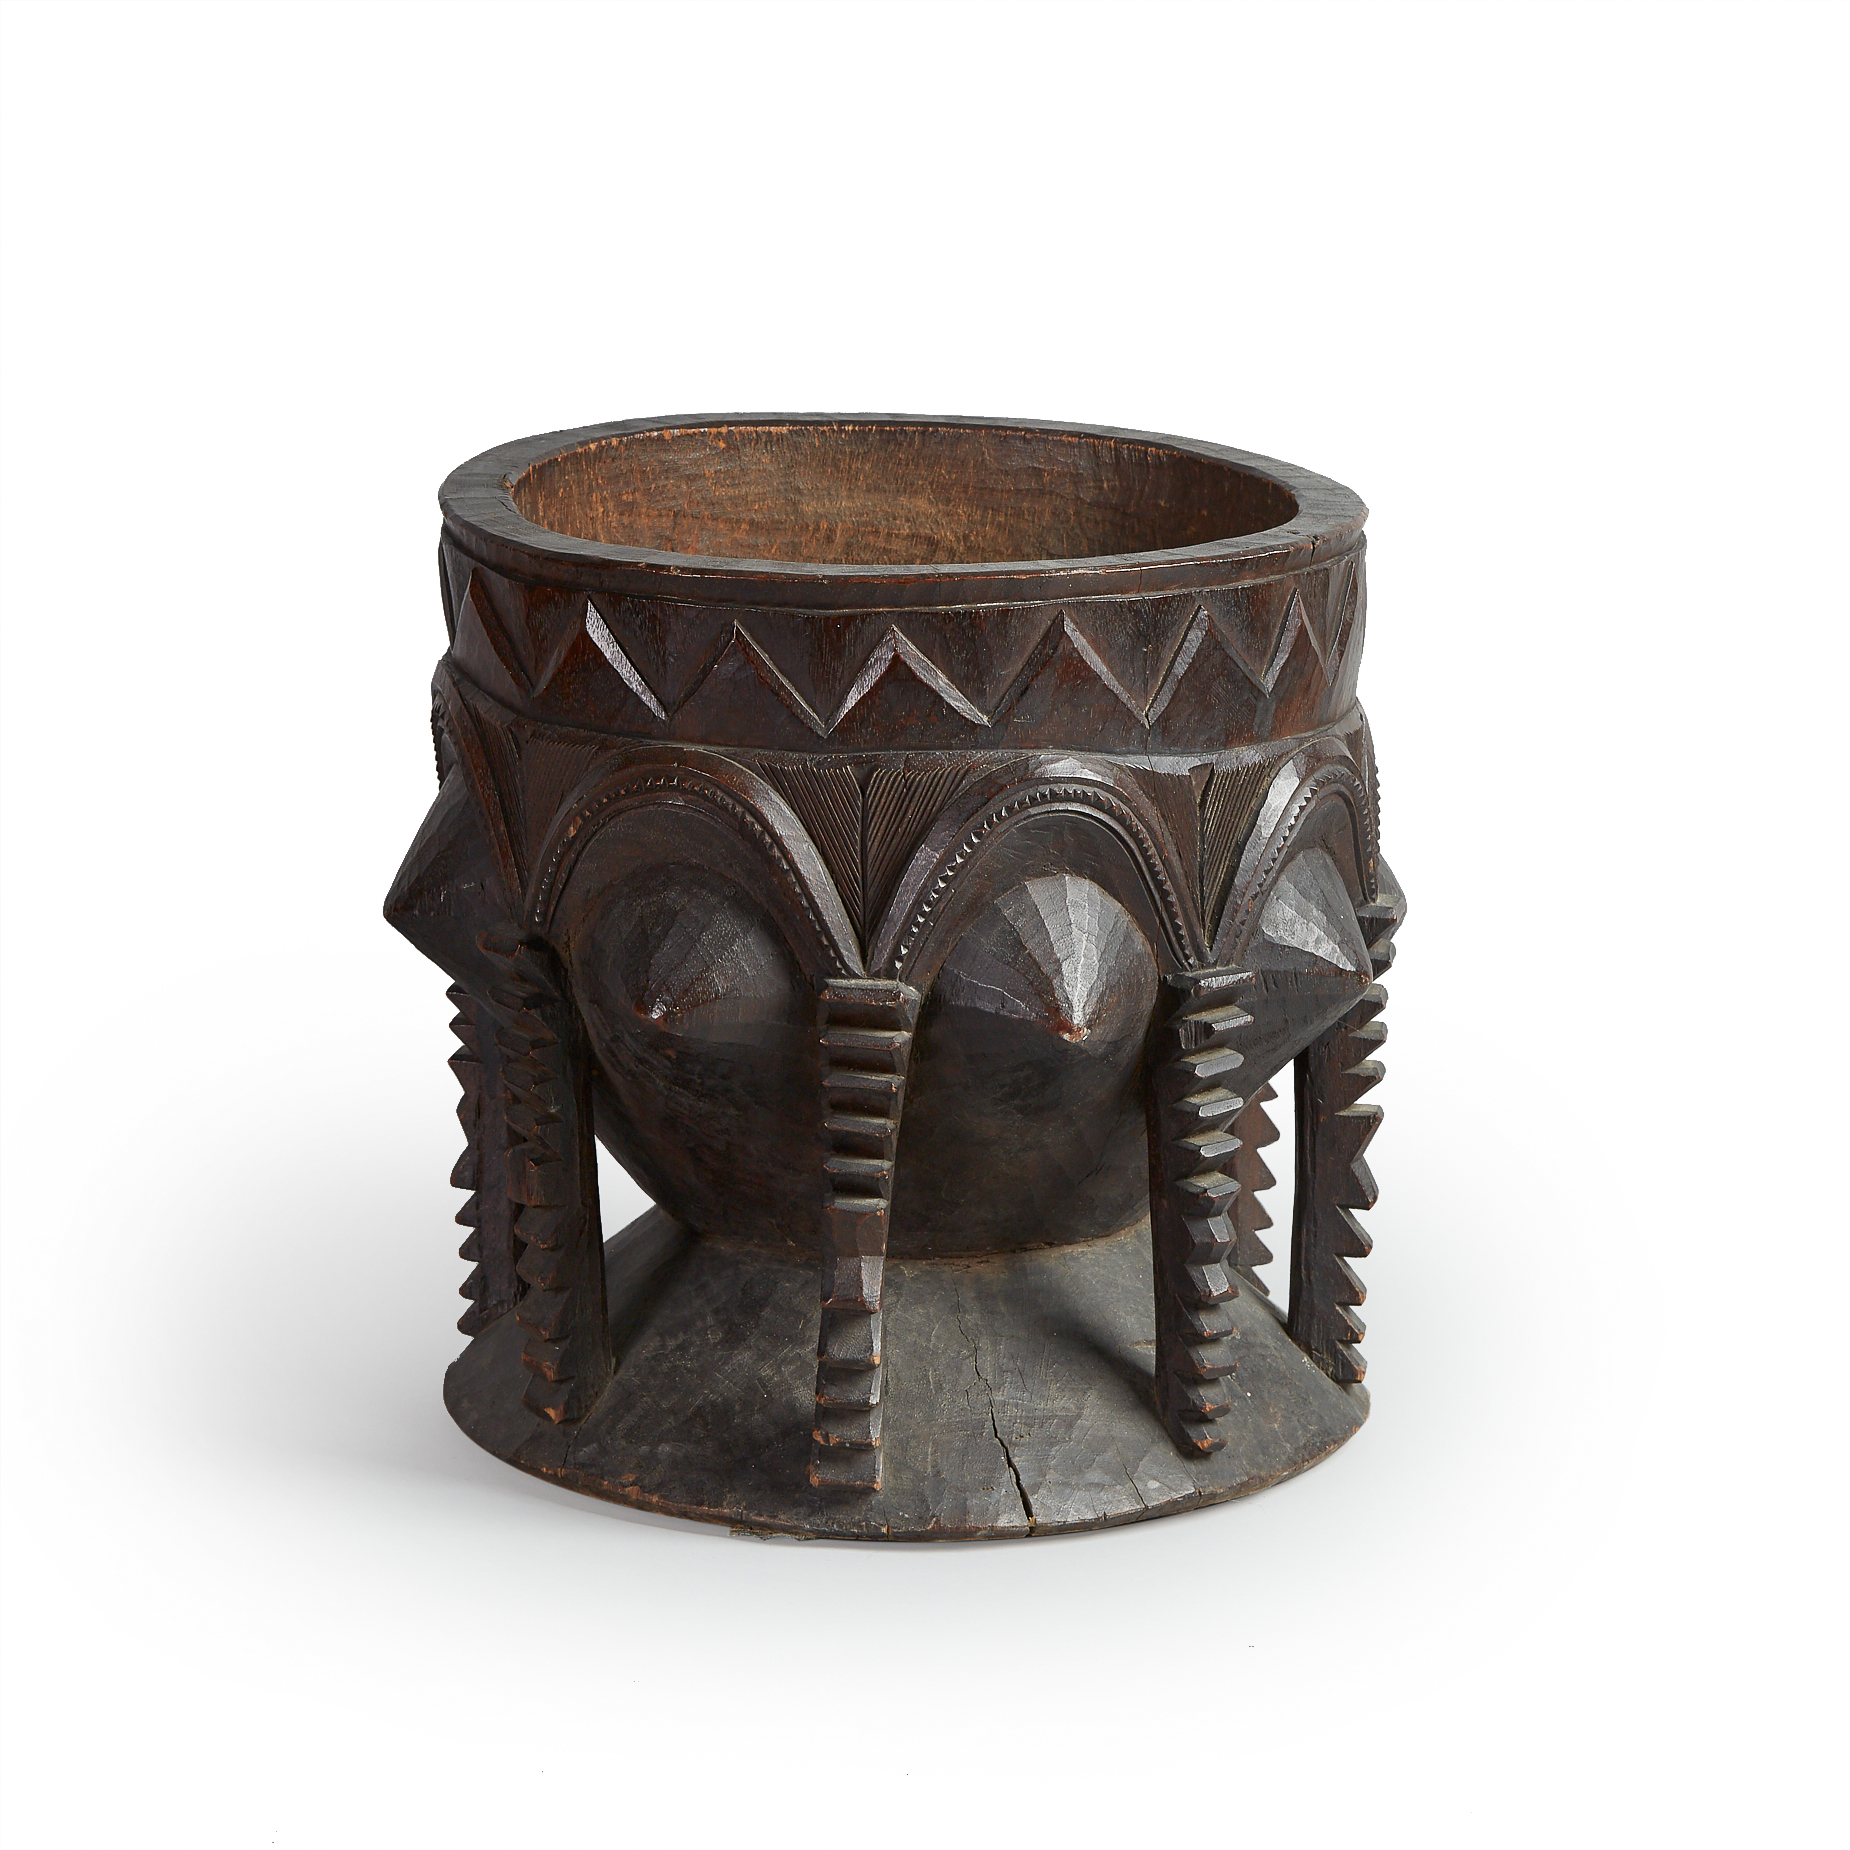 West African Mortar, early to mid 20th century